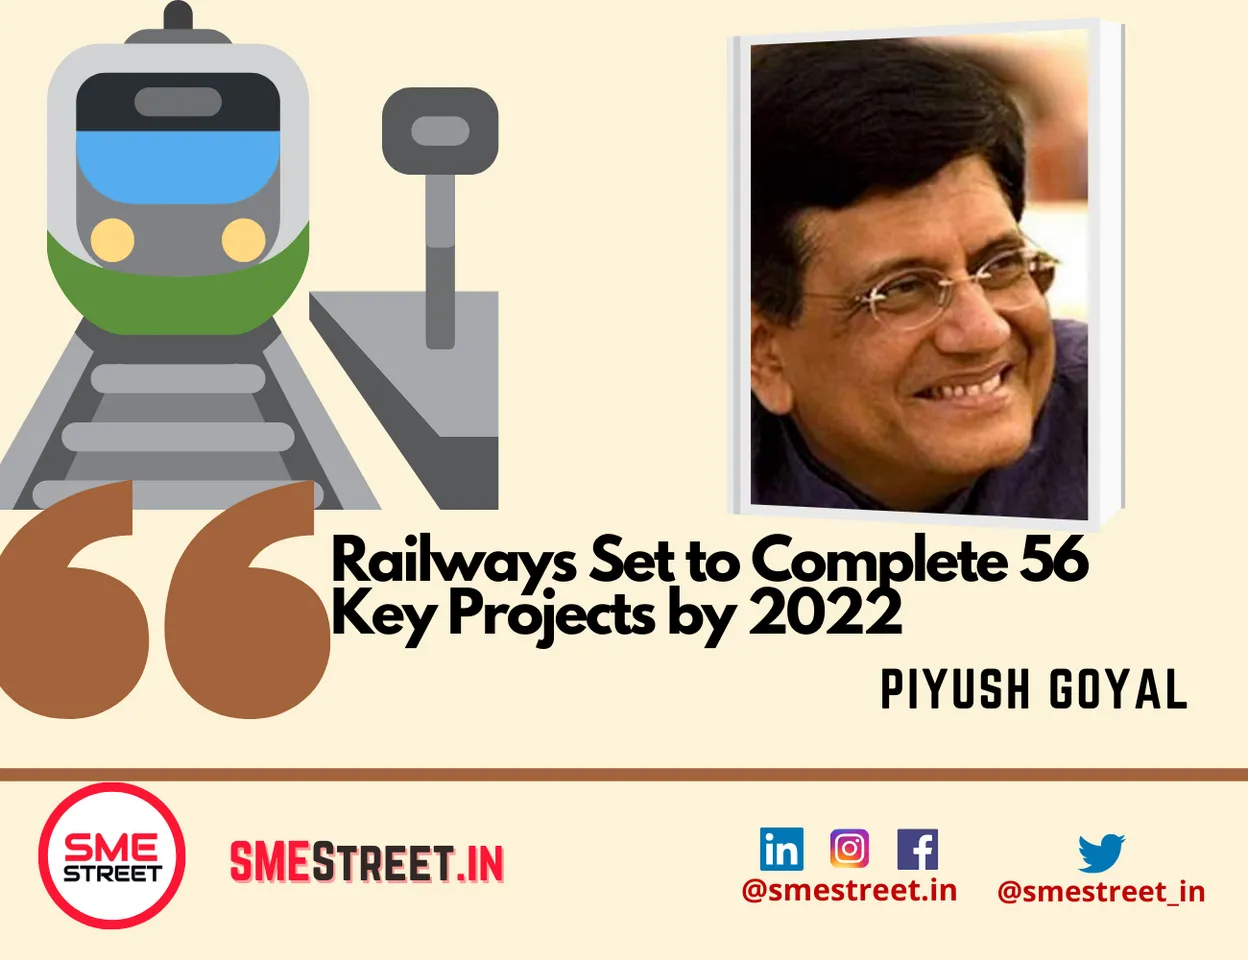 Piyush Goyal Reviews Critical Infrastructure Projects Under PMG Facilitation